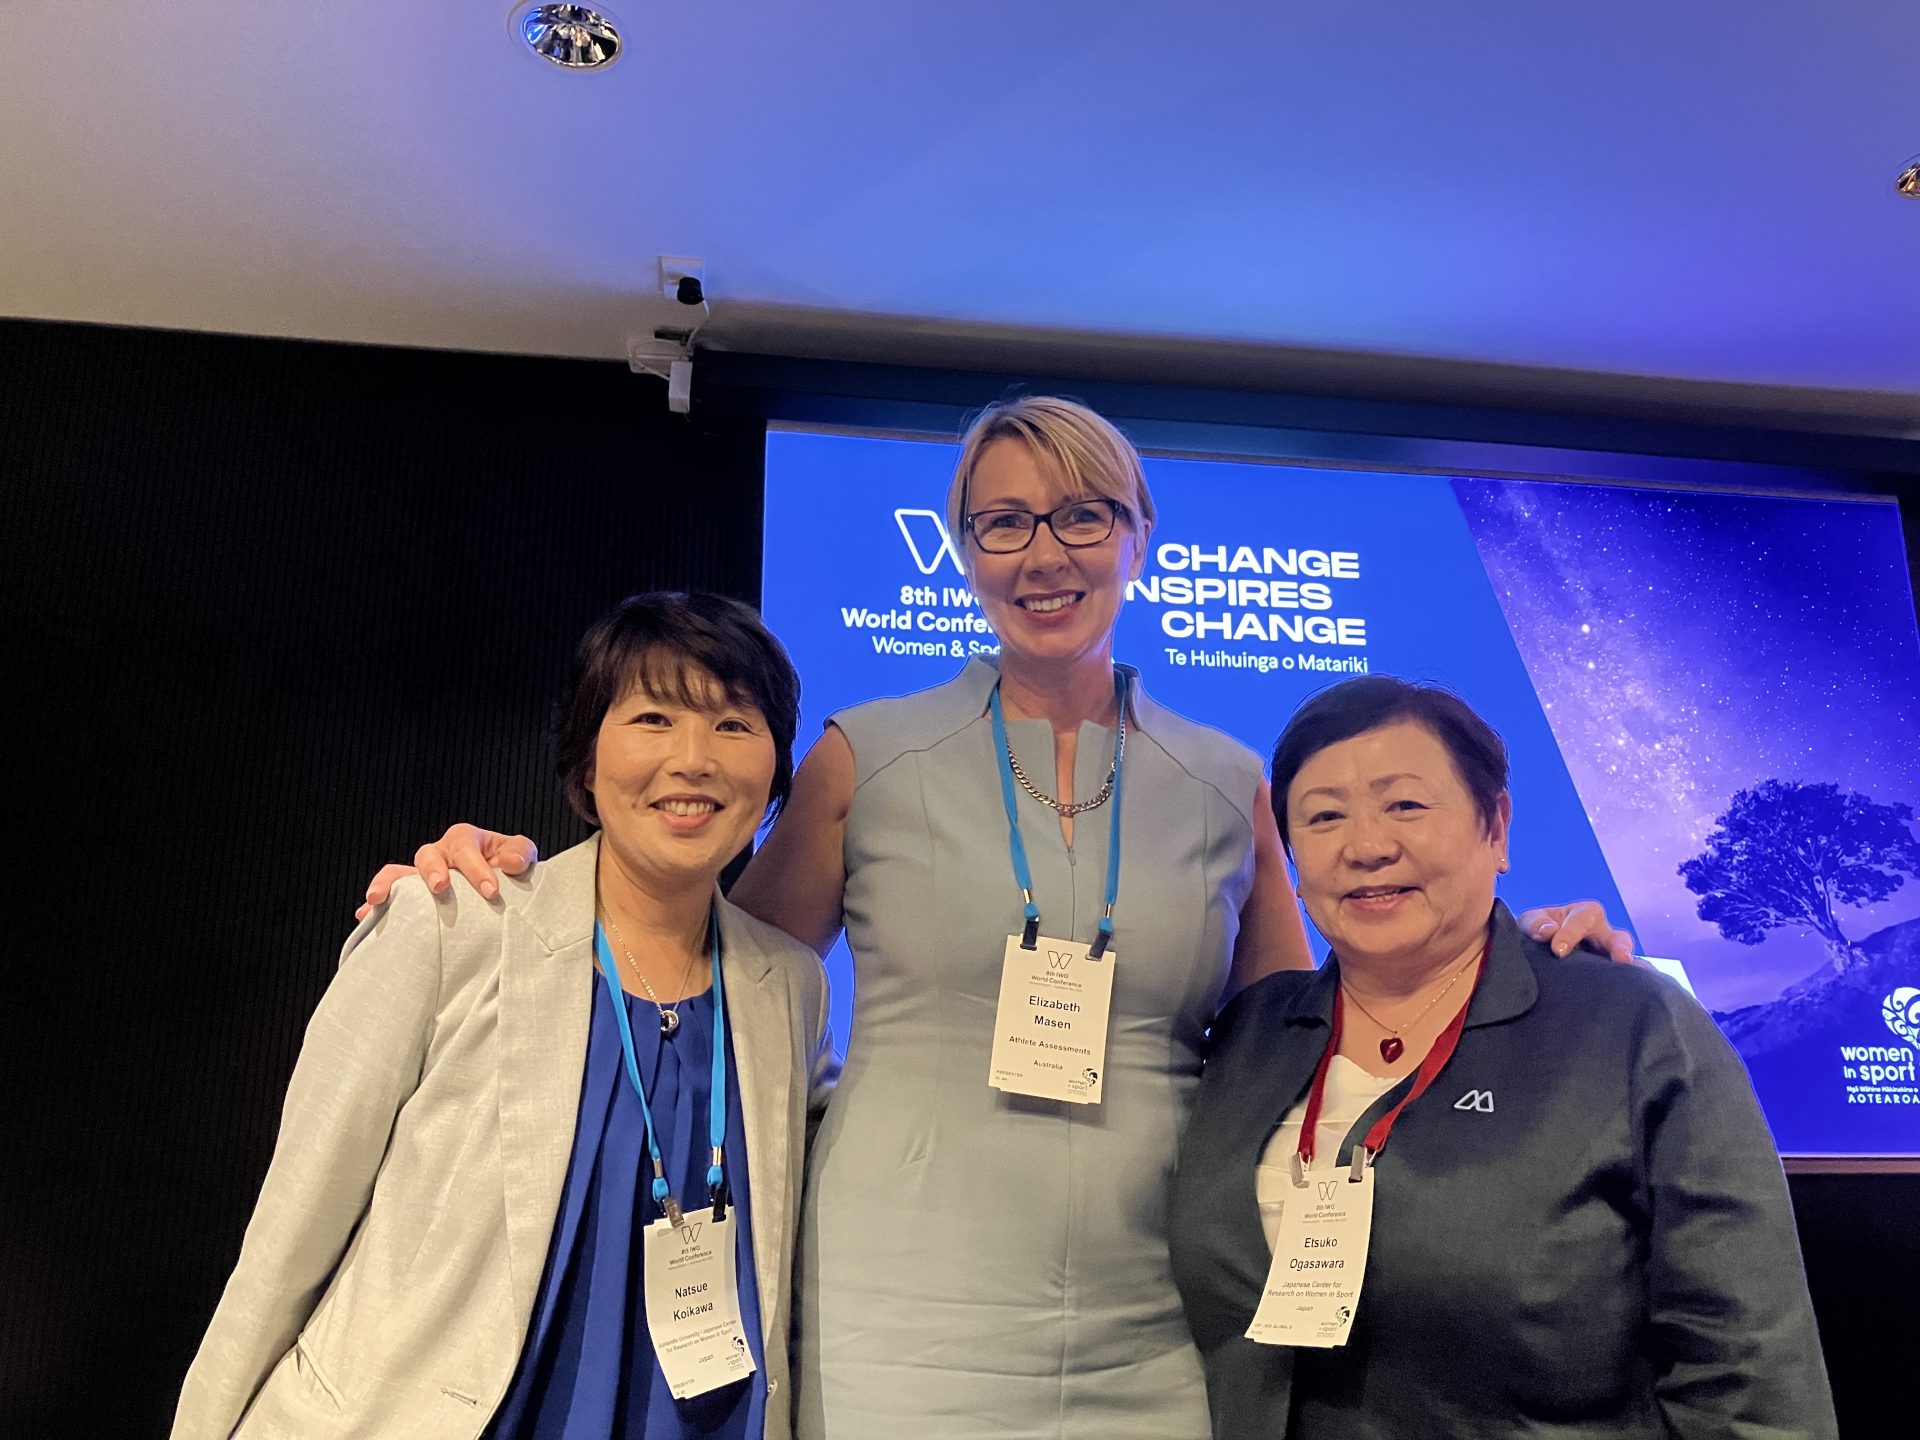 A joint Presentation was made on the U.S. NCAA WCA and the Japanese WCA at the “8th IWG World Conference on Women & Sport”